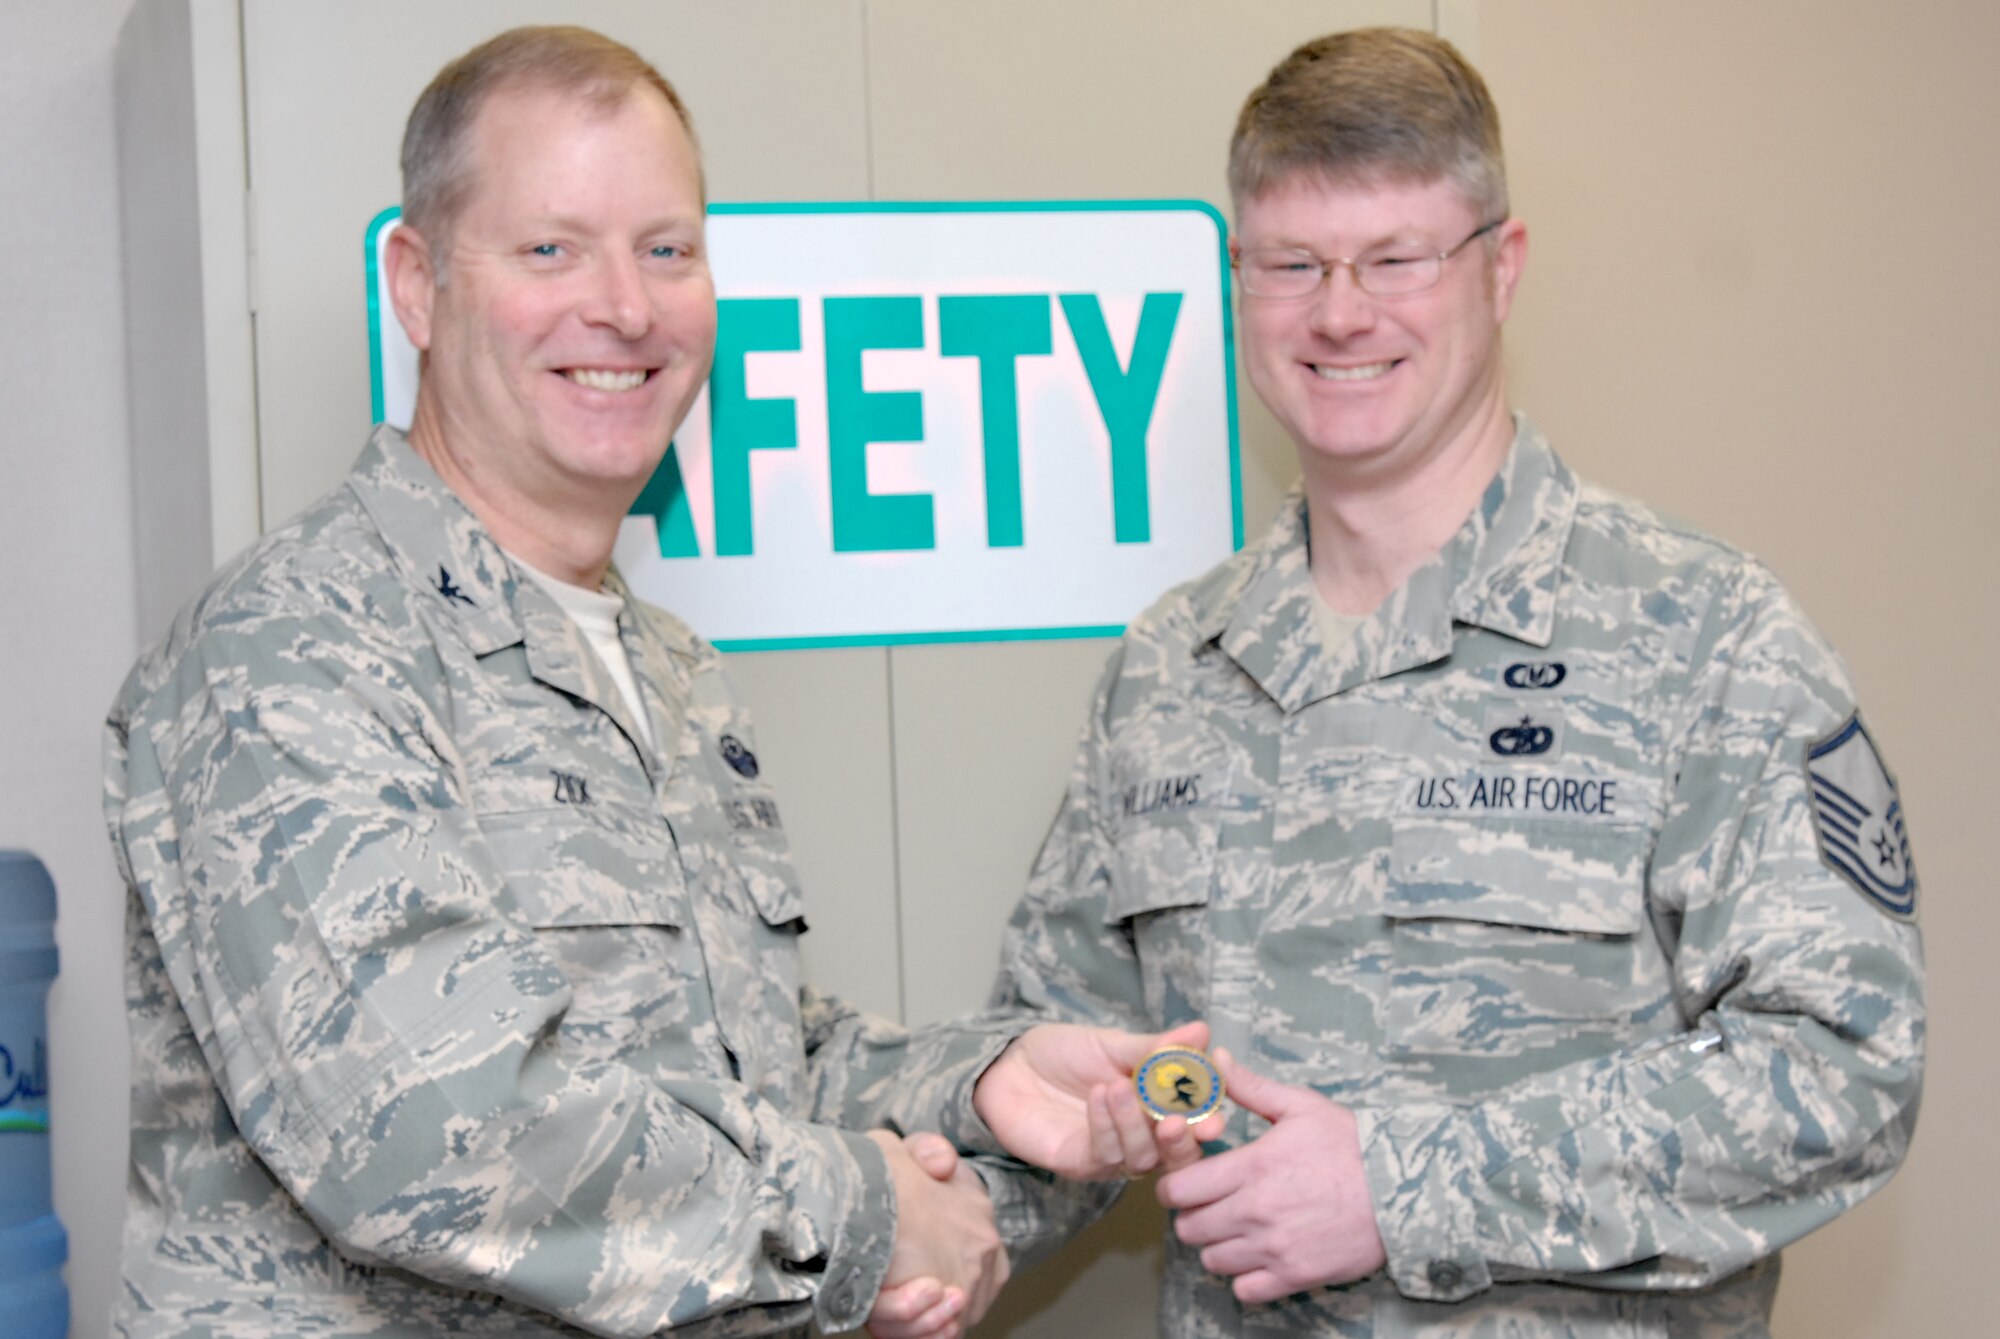 Col. Michael Zick, 19th Airlift Wing vice commander, presents Master Sgt. Donald Williams, 19th Airlift Wing Safety ground safety superintendent, with a commanders coin Jan. 5 for being chosen as the Combat Airlifter of the Week. He led 16 operational risk management classes, trained 350 members for supervising safety and investigated 350 mishaps last year in 2009. (U.S. Air Force photo by Senior Airman Christine Clark)